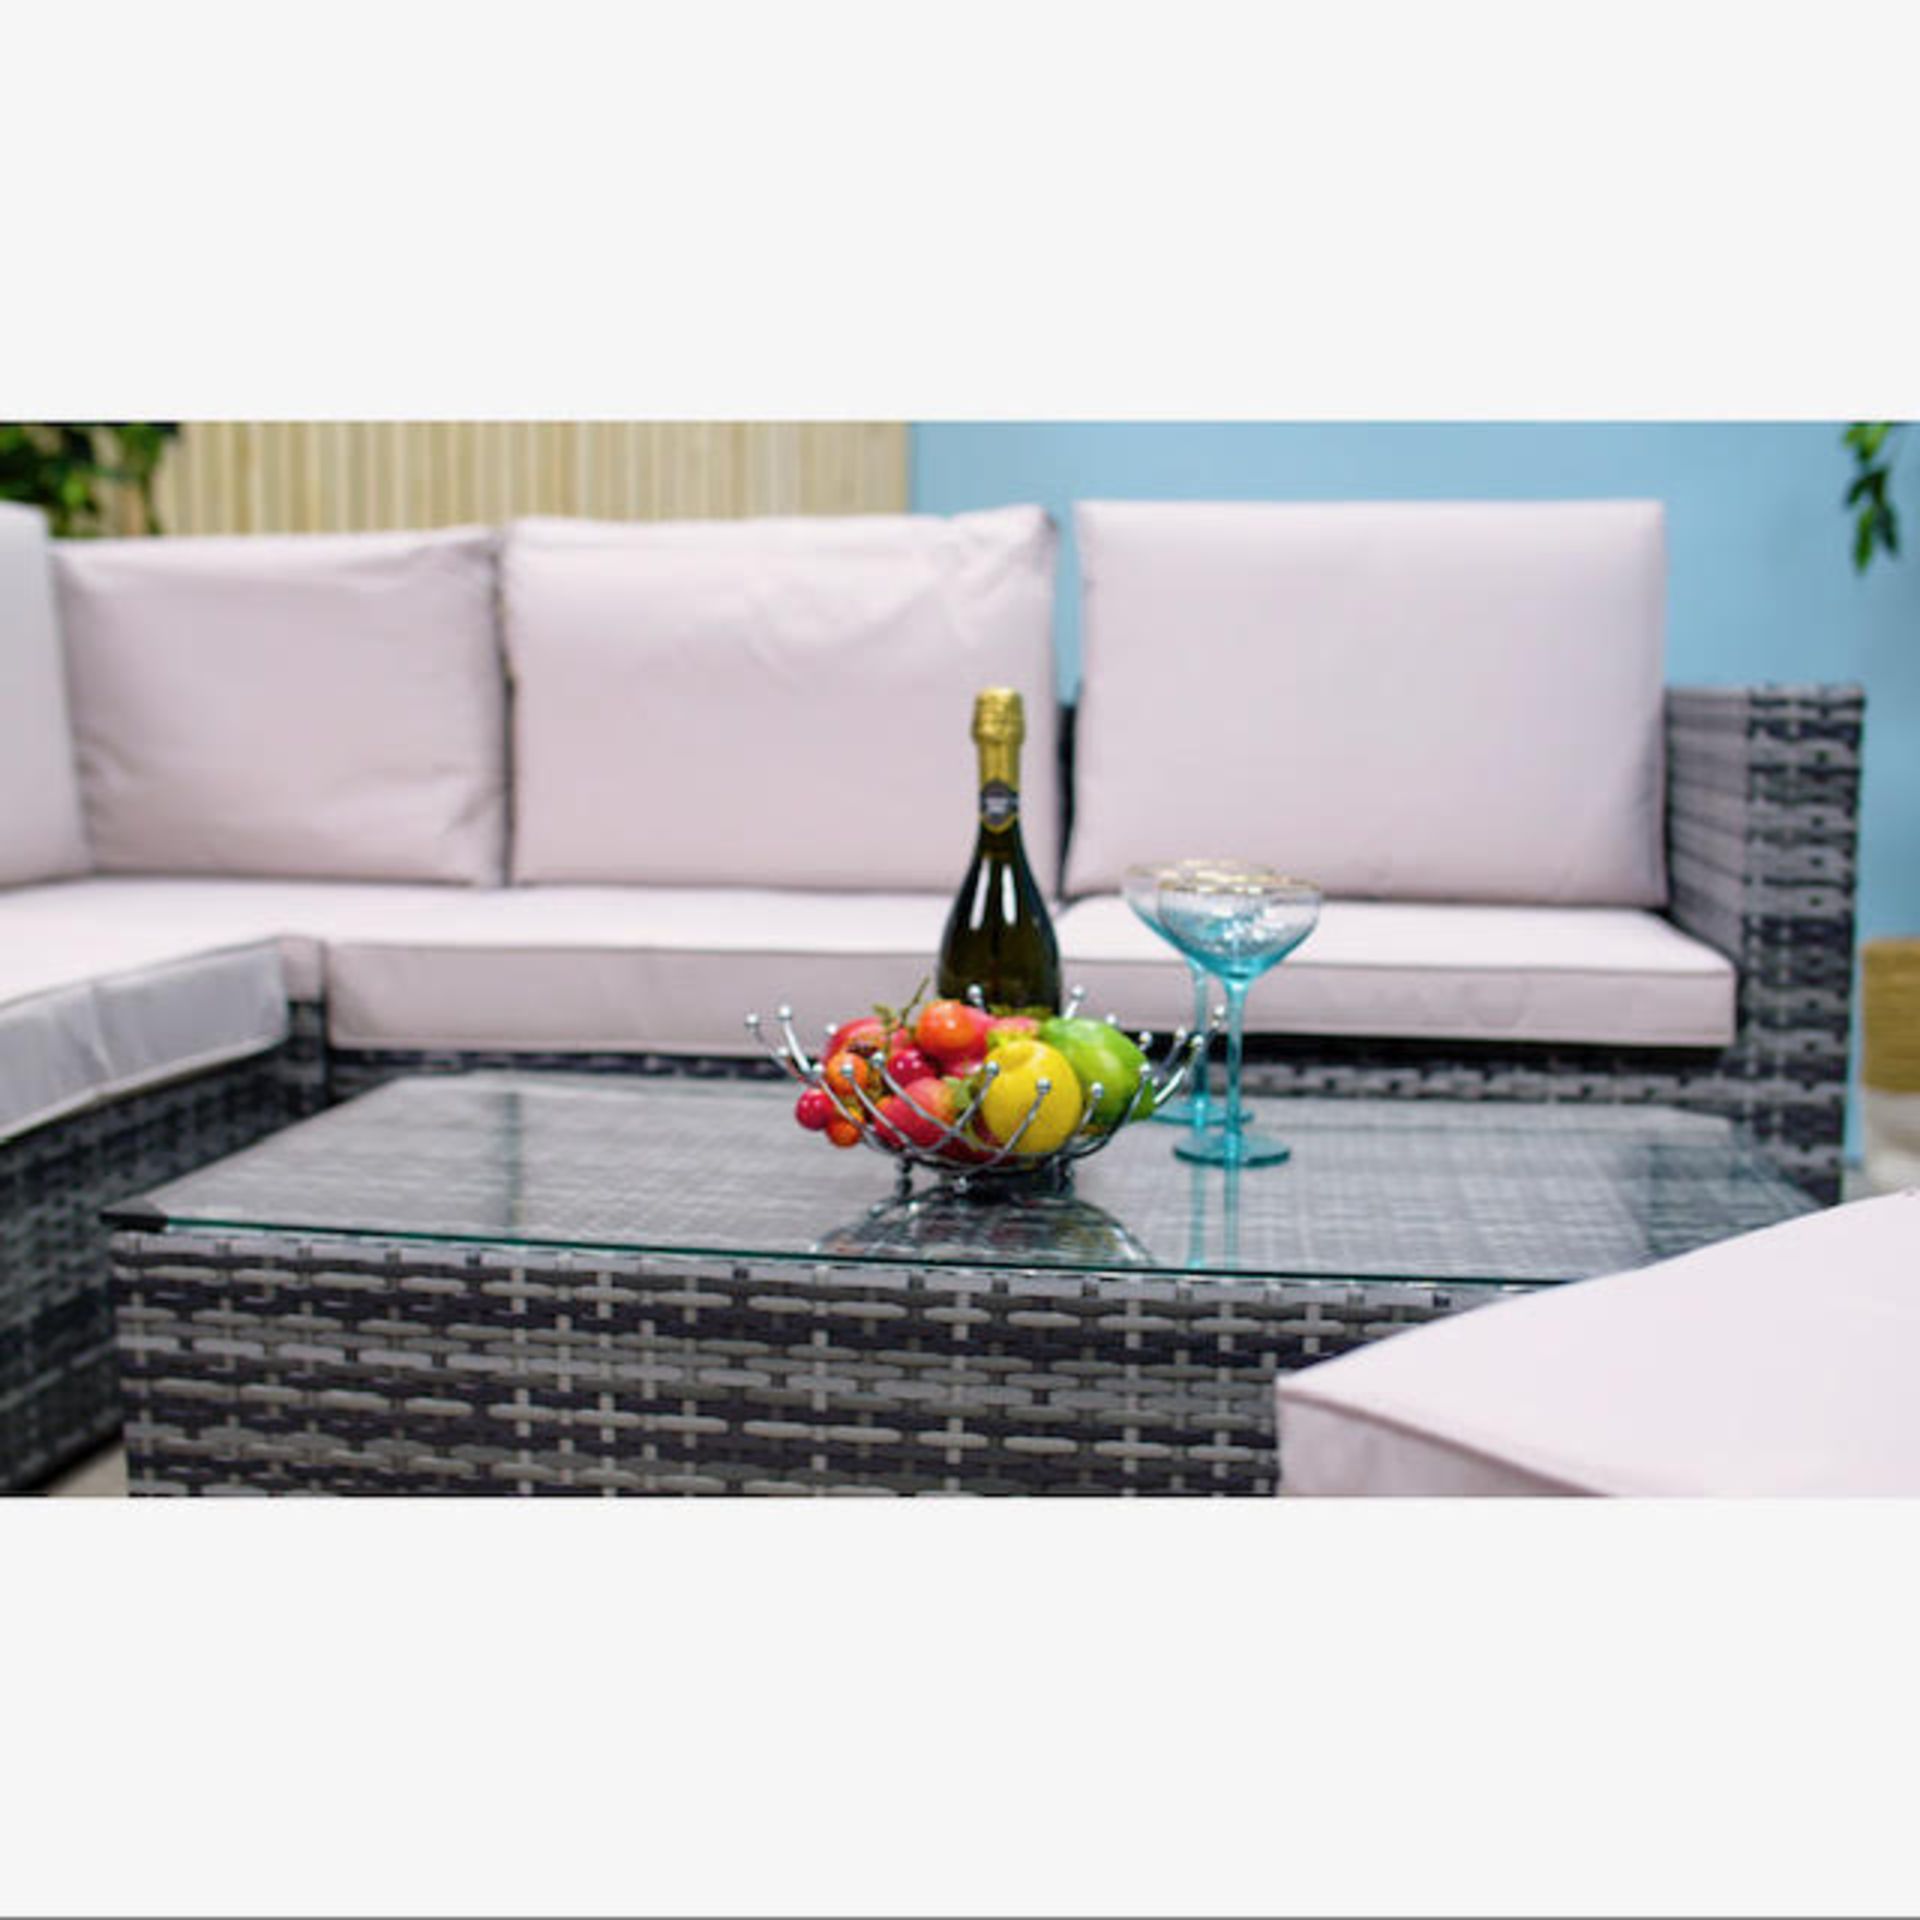 BRAND NEW LINEA 7 PIECE LUXURY RATTAN SETS RRP £1499 EACH. PERFECT FOR THOSE SUMMER NIGHTS FOR - Image 2 of 6